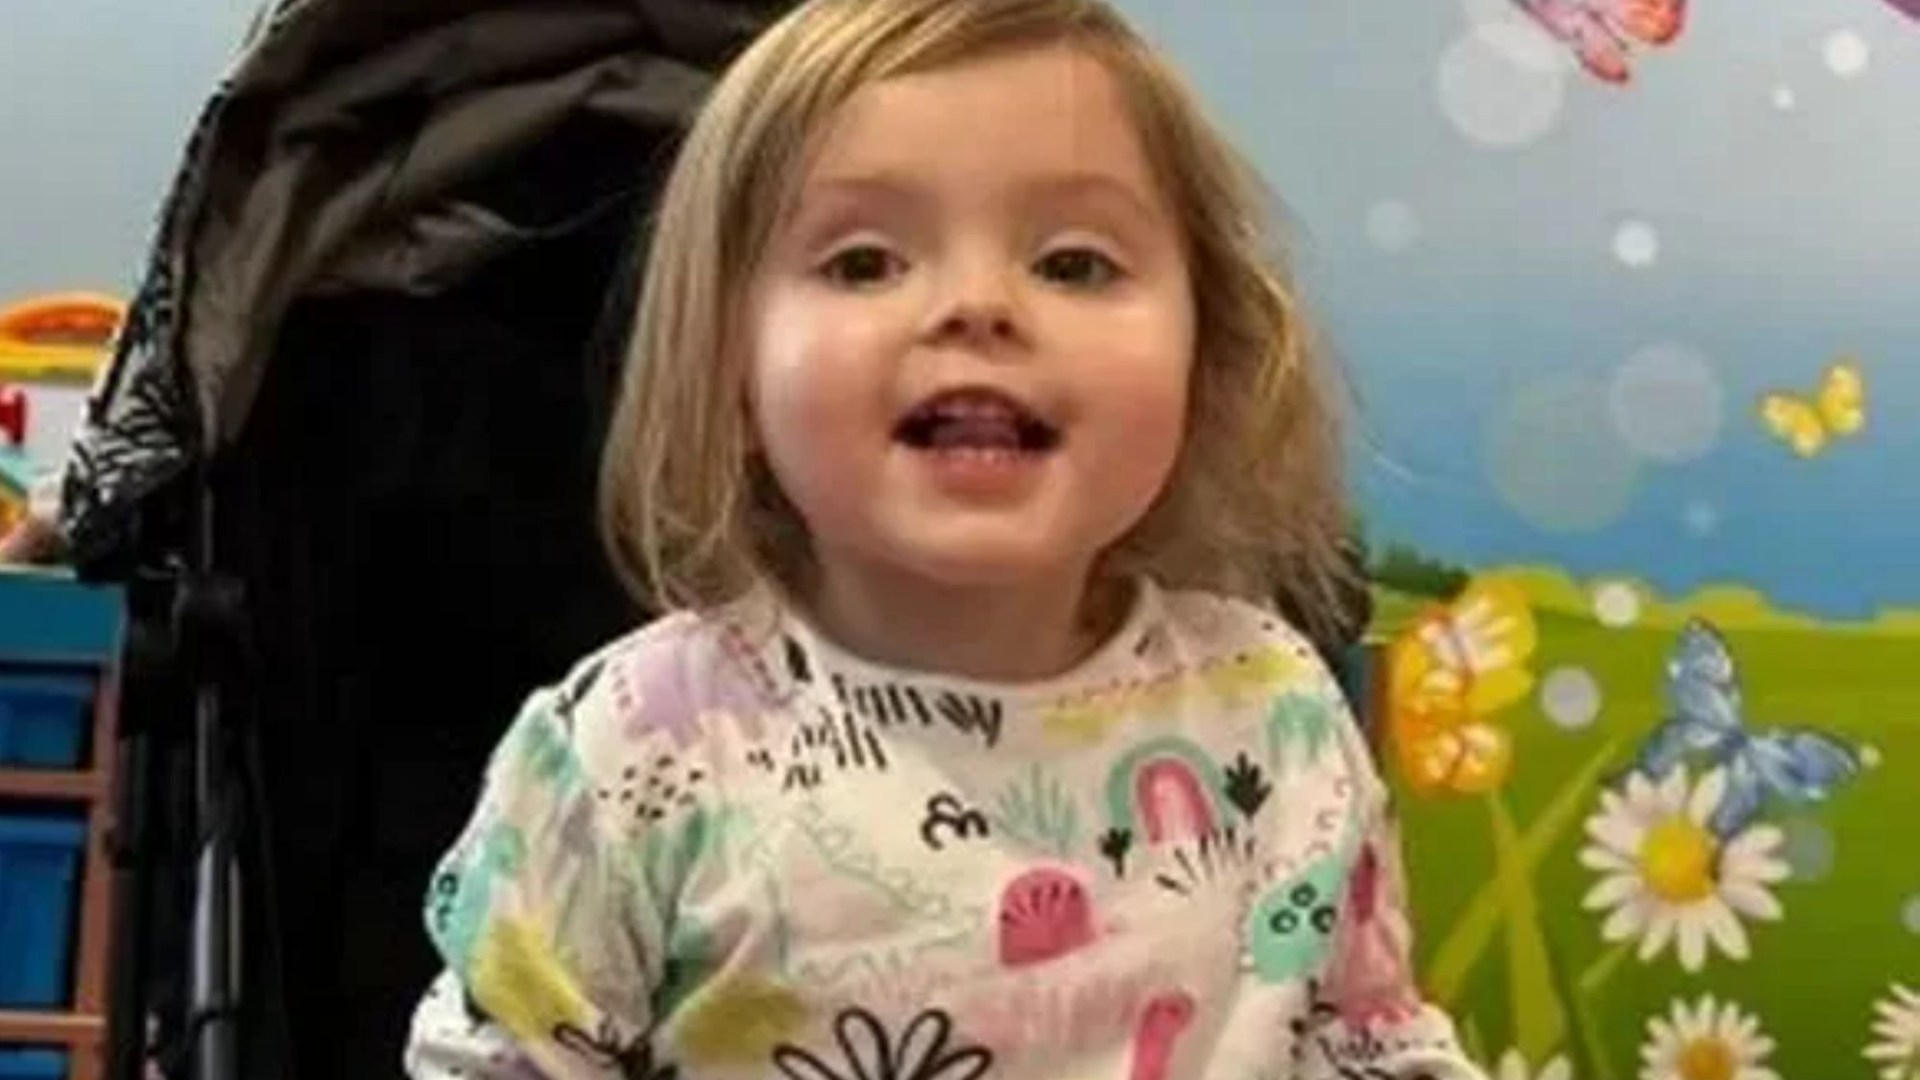 Family’s world ‘shattered into uncountable pieces’ after true cause of ‘sassy’ toddler’s rash is found [Video]